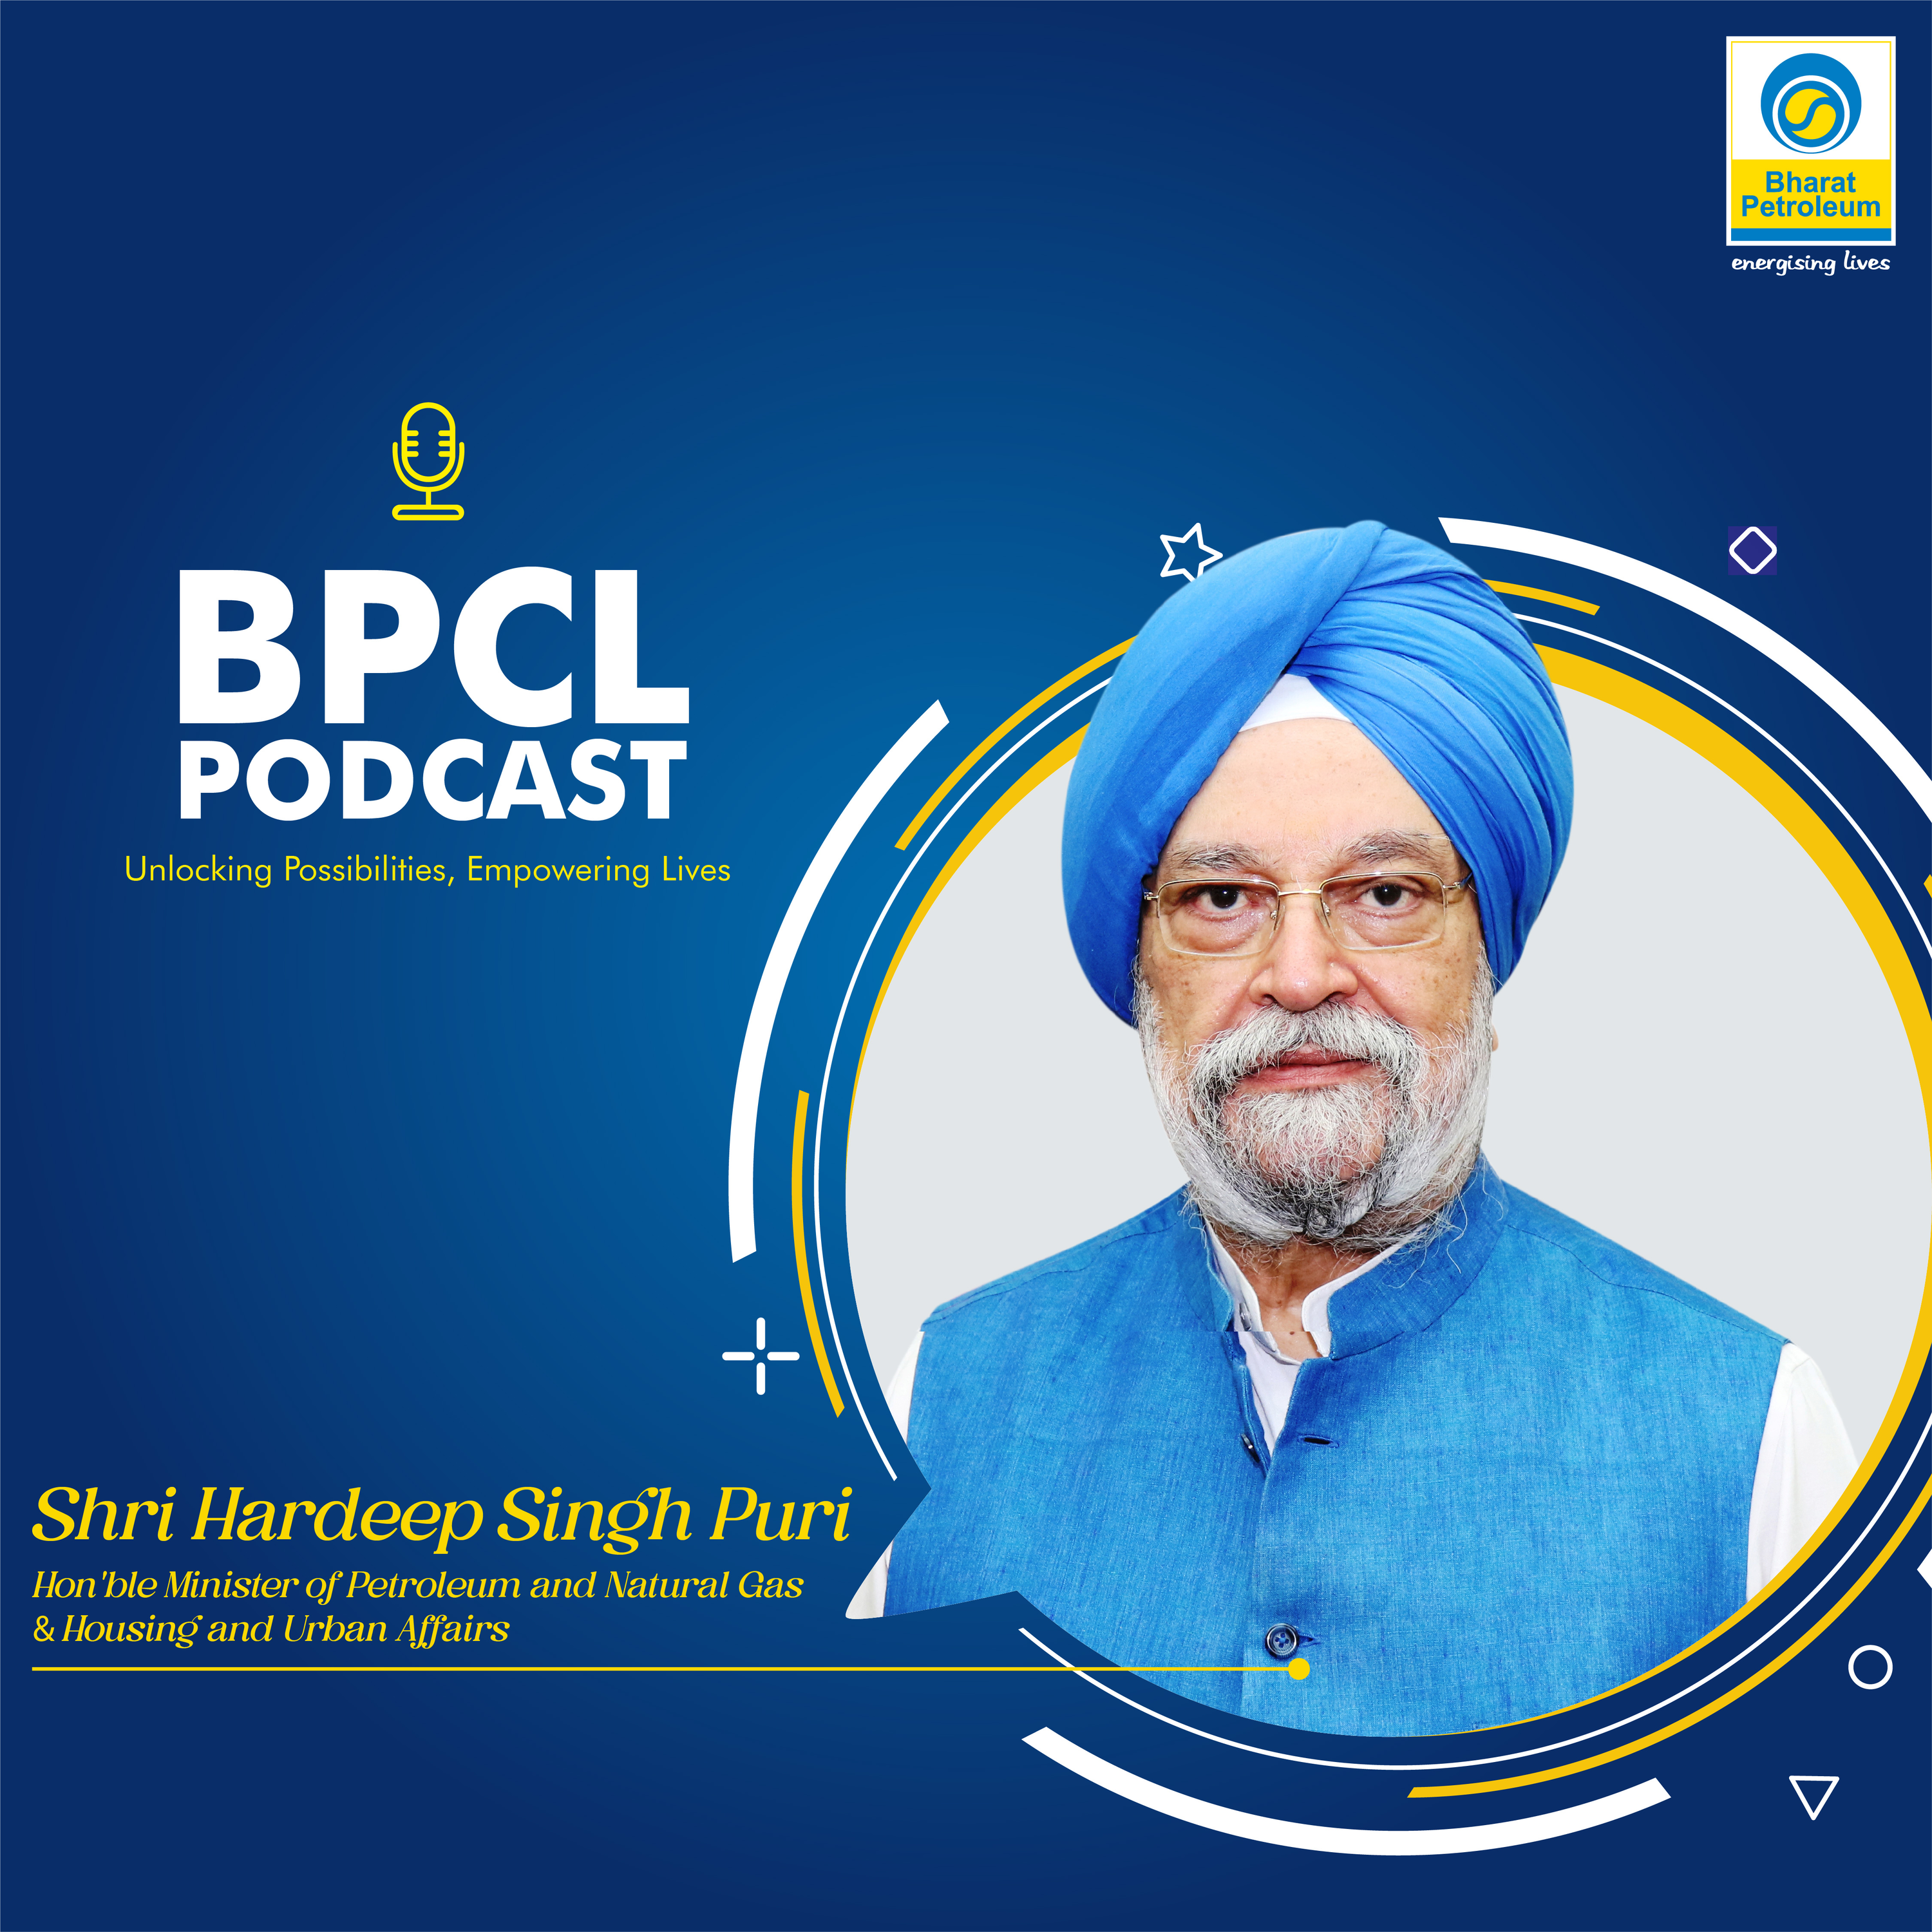 Shri Hardeep Singh Puri, Hon'ble Minister of Petroleum & Natural Gas and Union Minister for Housing & Urban Affairs